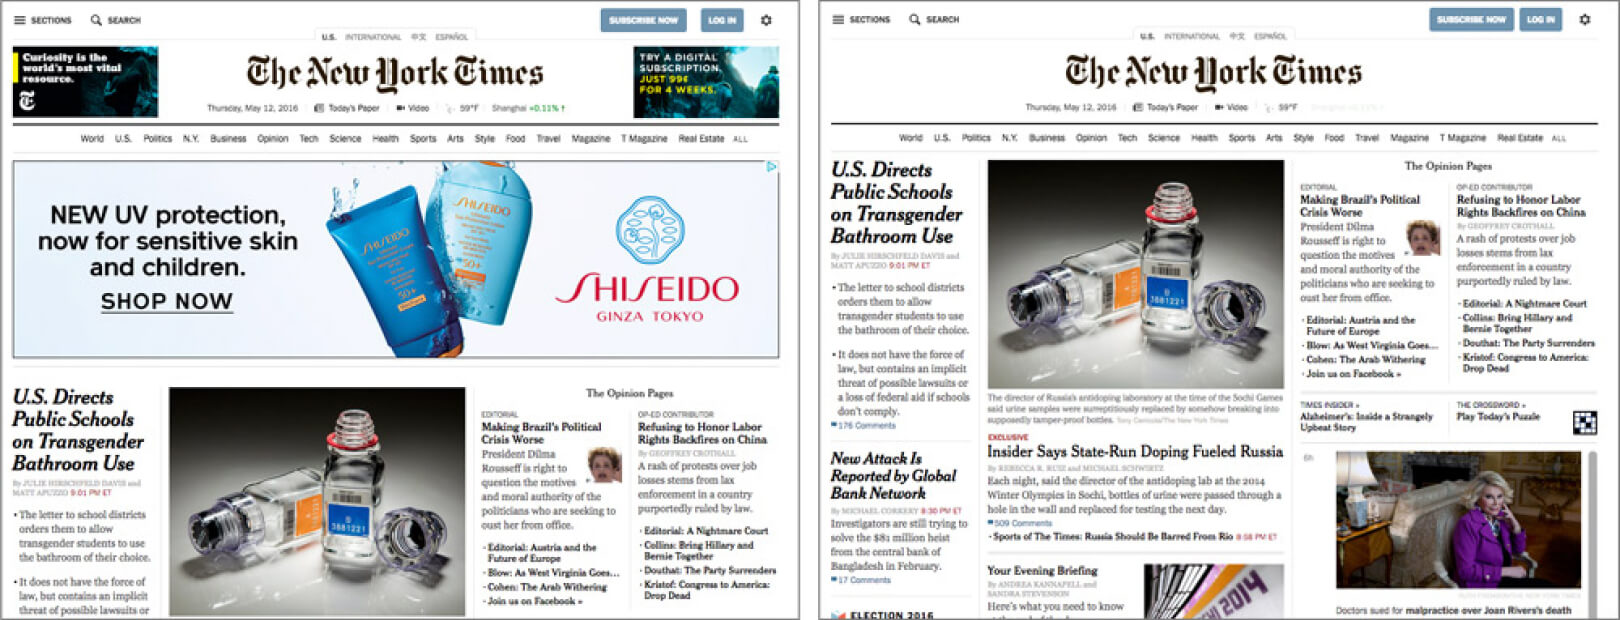 Side-by-side comparison of The New York Times website displayed with and without an ad blocker, showing a cleaner interface in the ad-free version